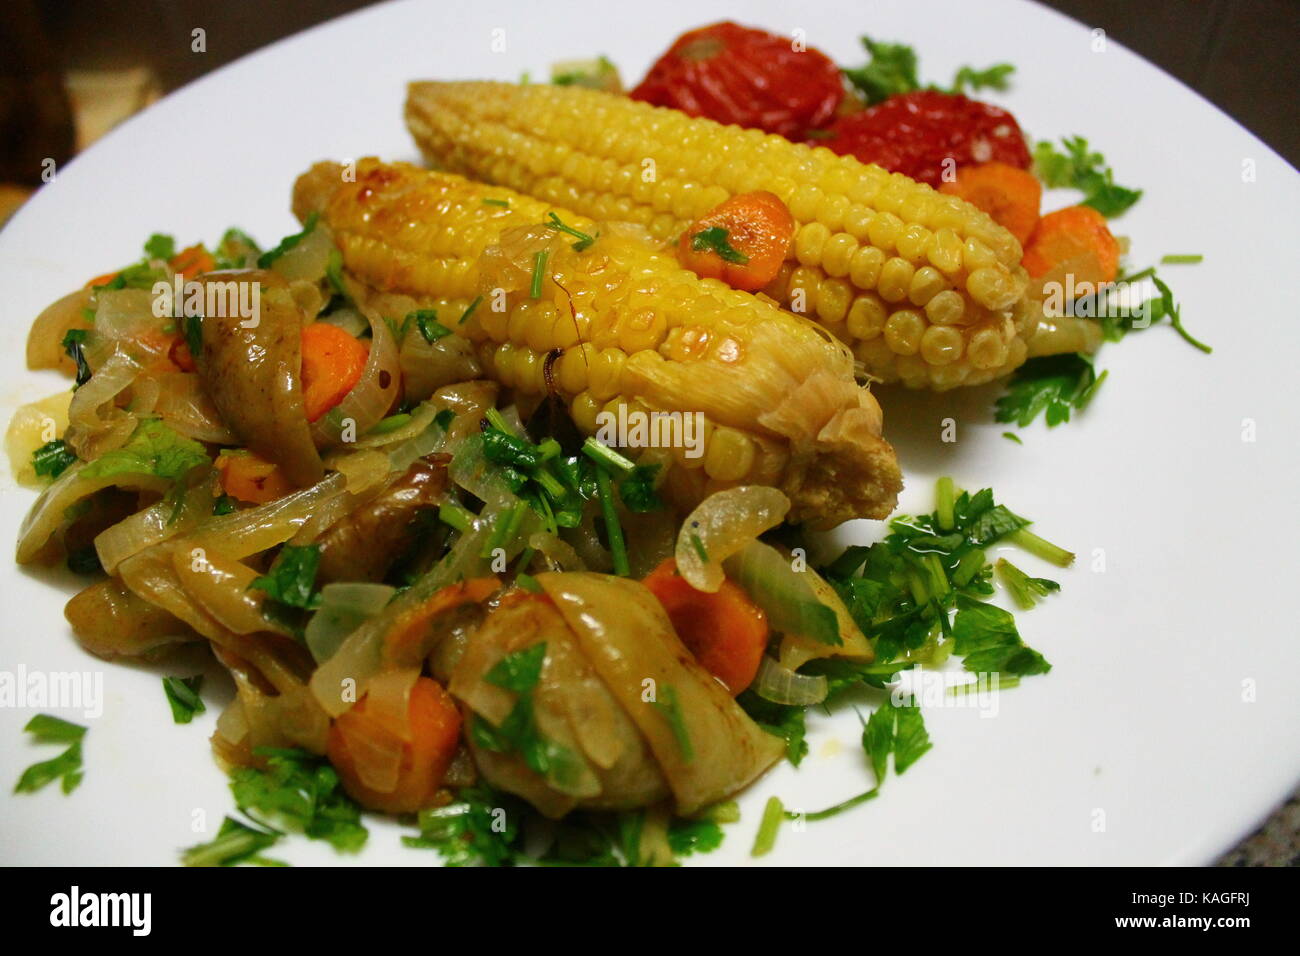 appetizing rolls of yellow sweet corn with tomato and pepper lay on white plate prepare for meal Stock Photo